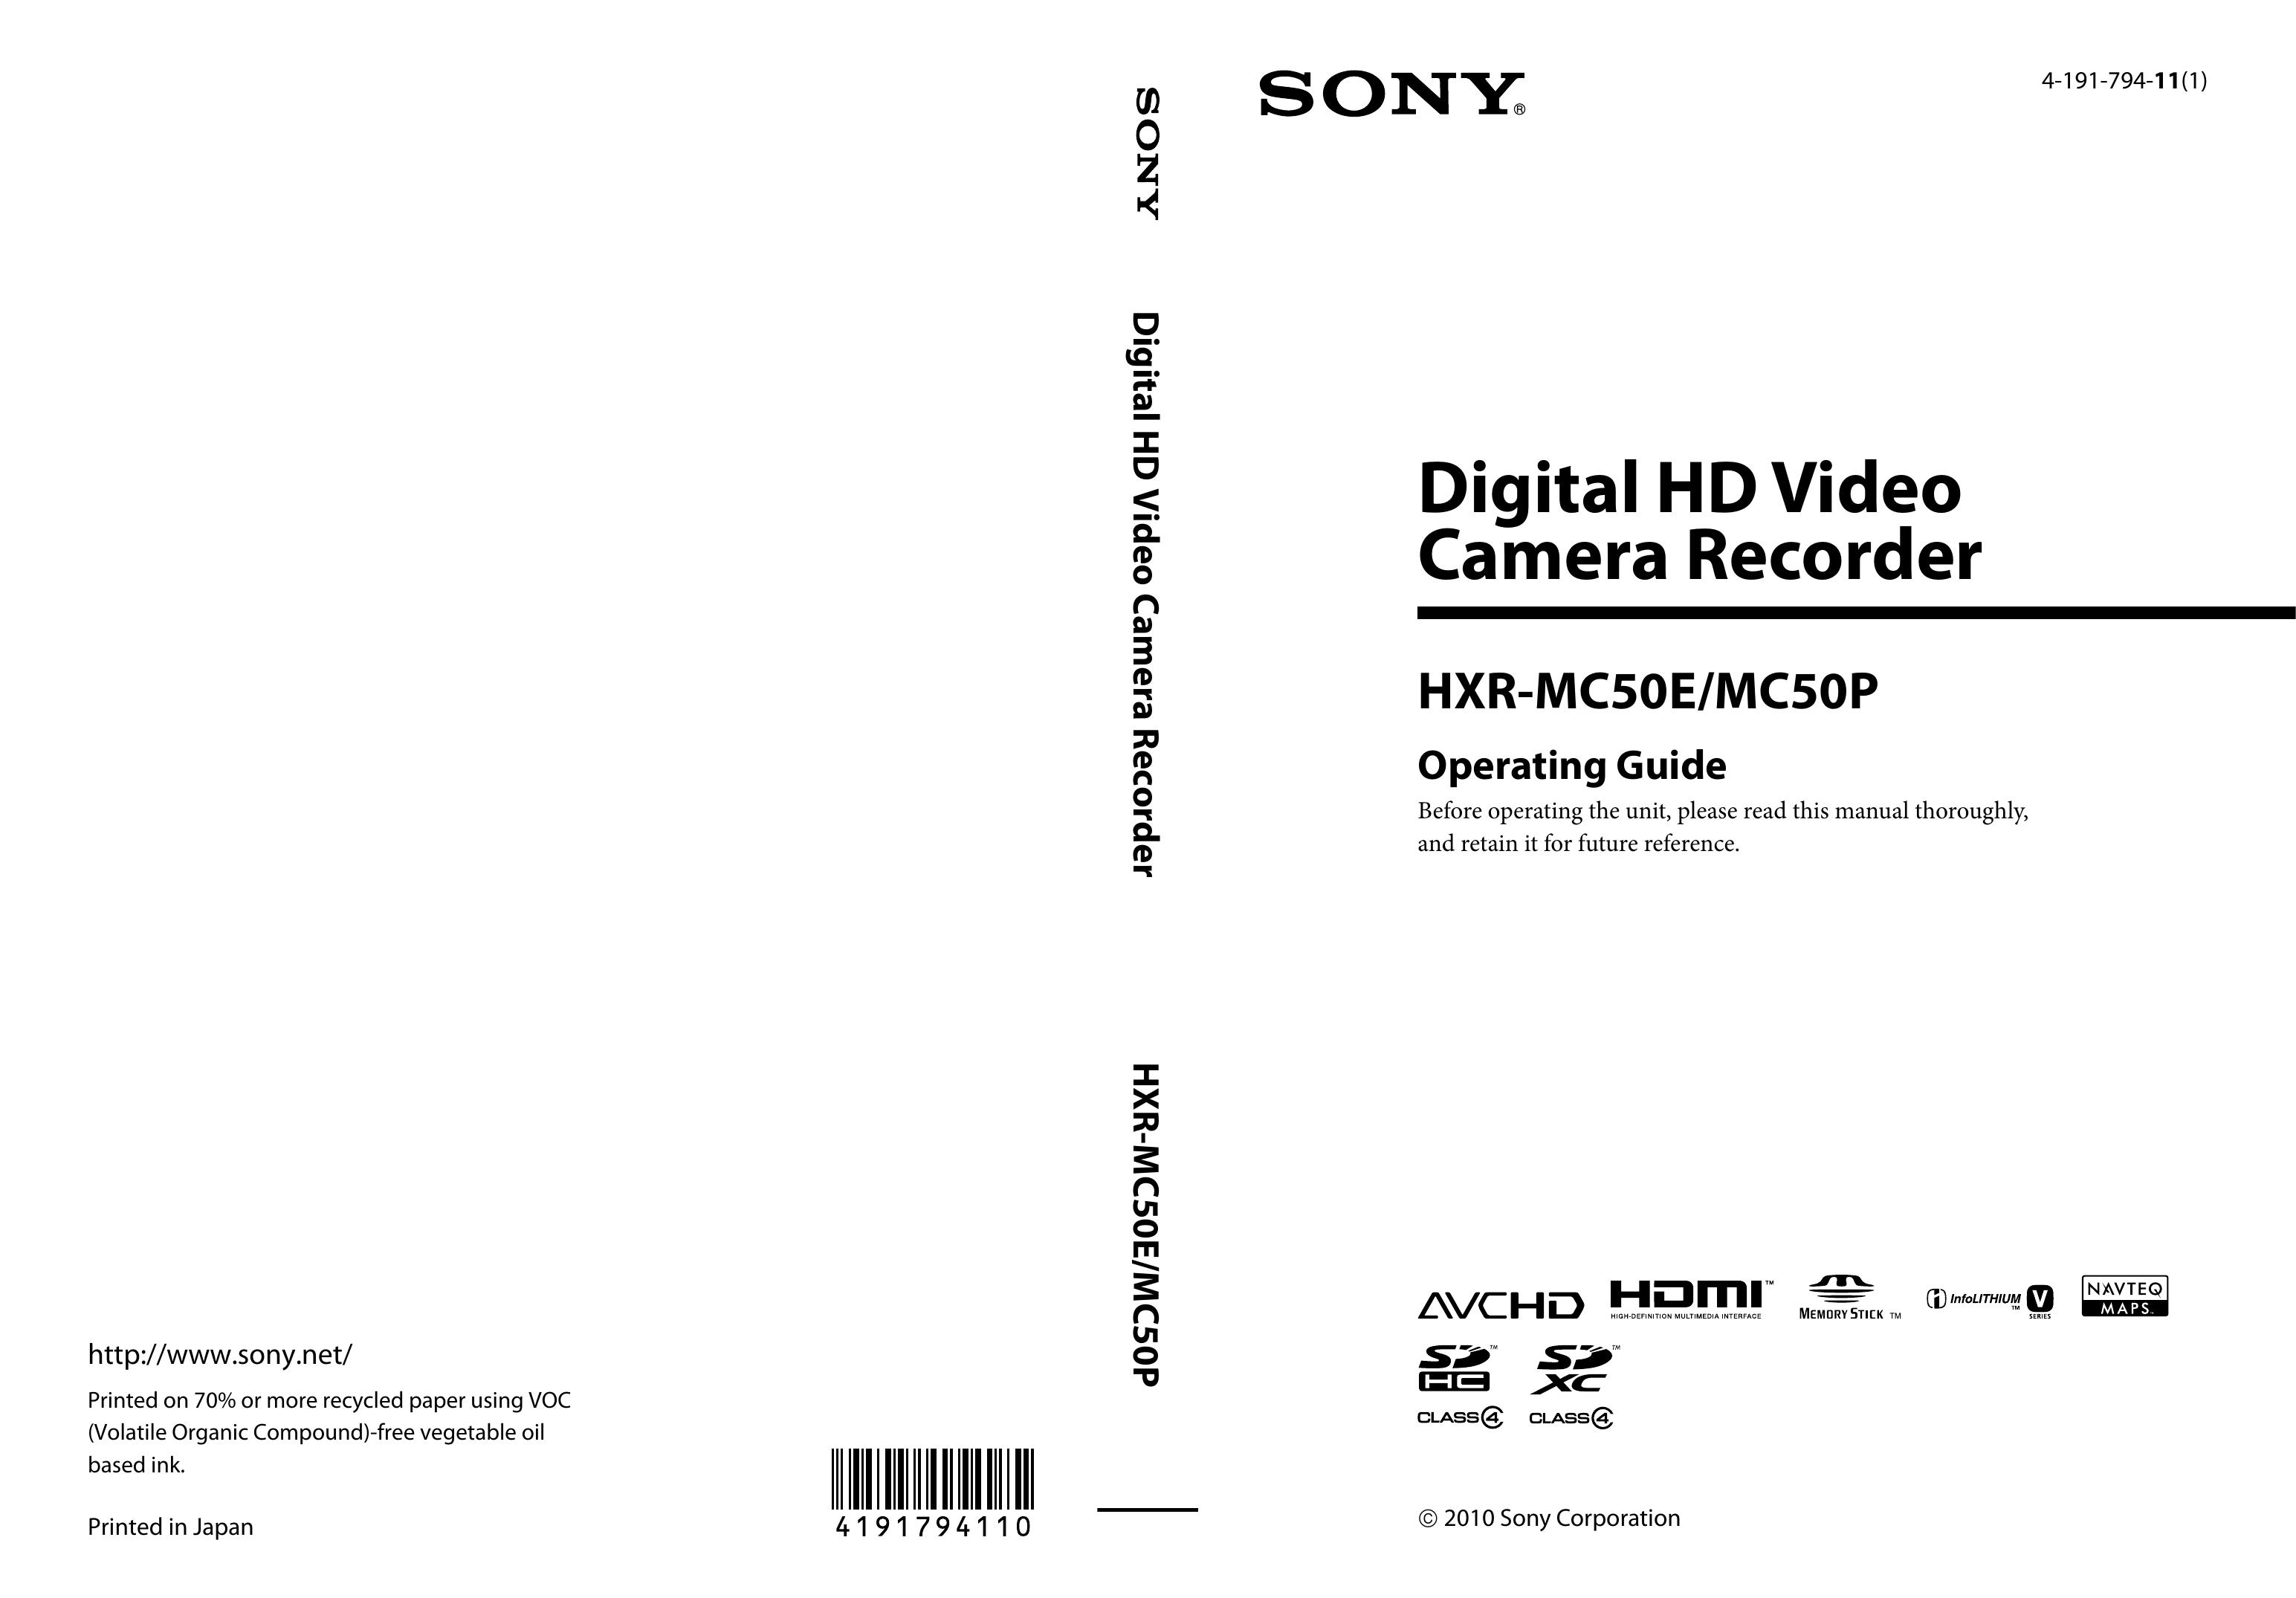 Sony 4-191-794-11(1) Camcorder User Manual